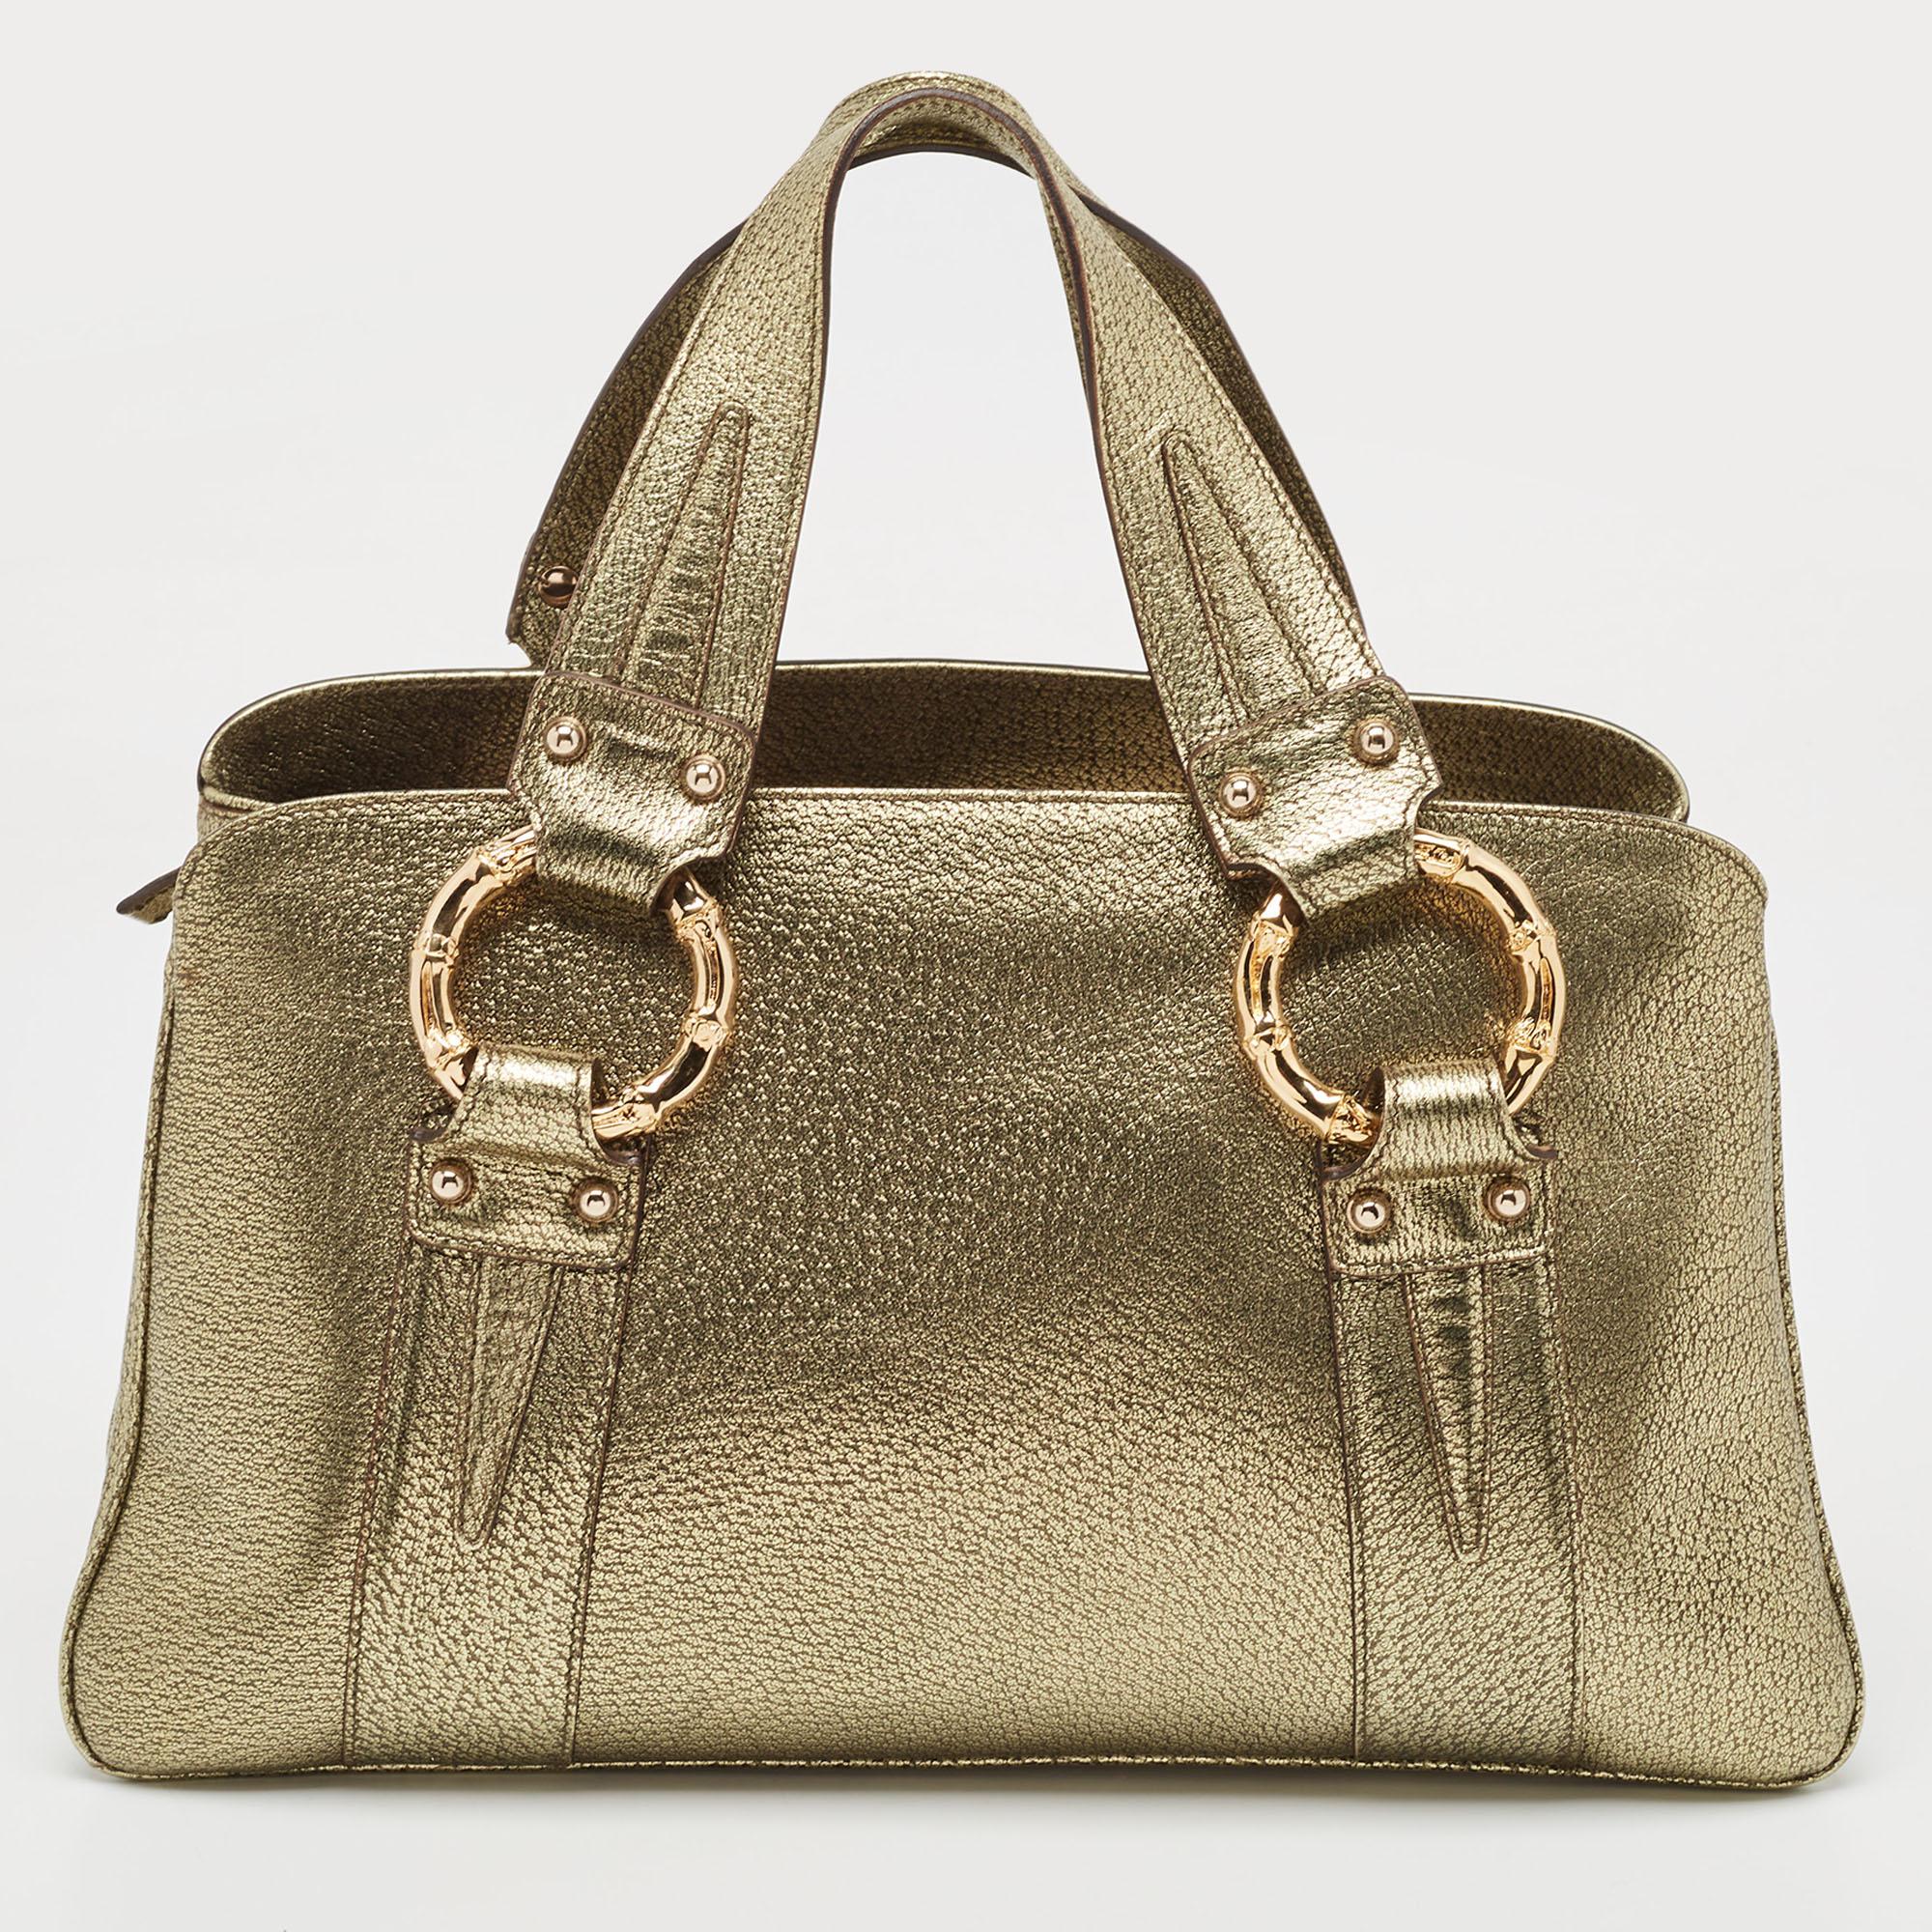 Gucci Gold Leather Metal Bamboo Ring Bag In Good Condition For Sale In Dubai, Al Qouz 2